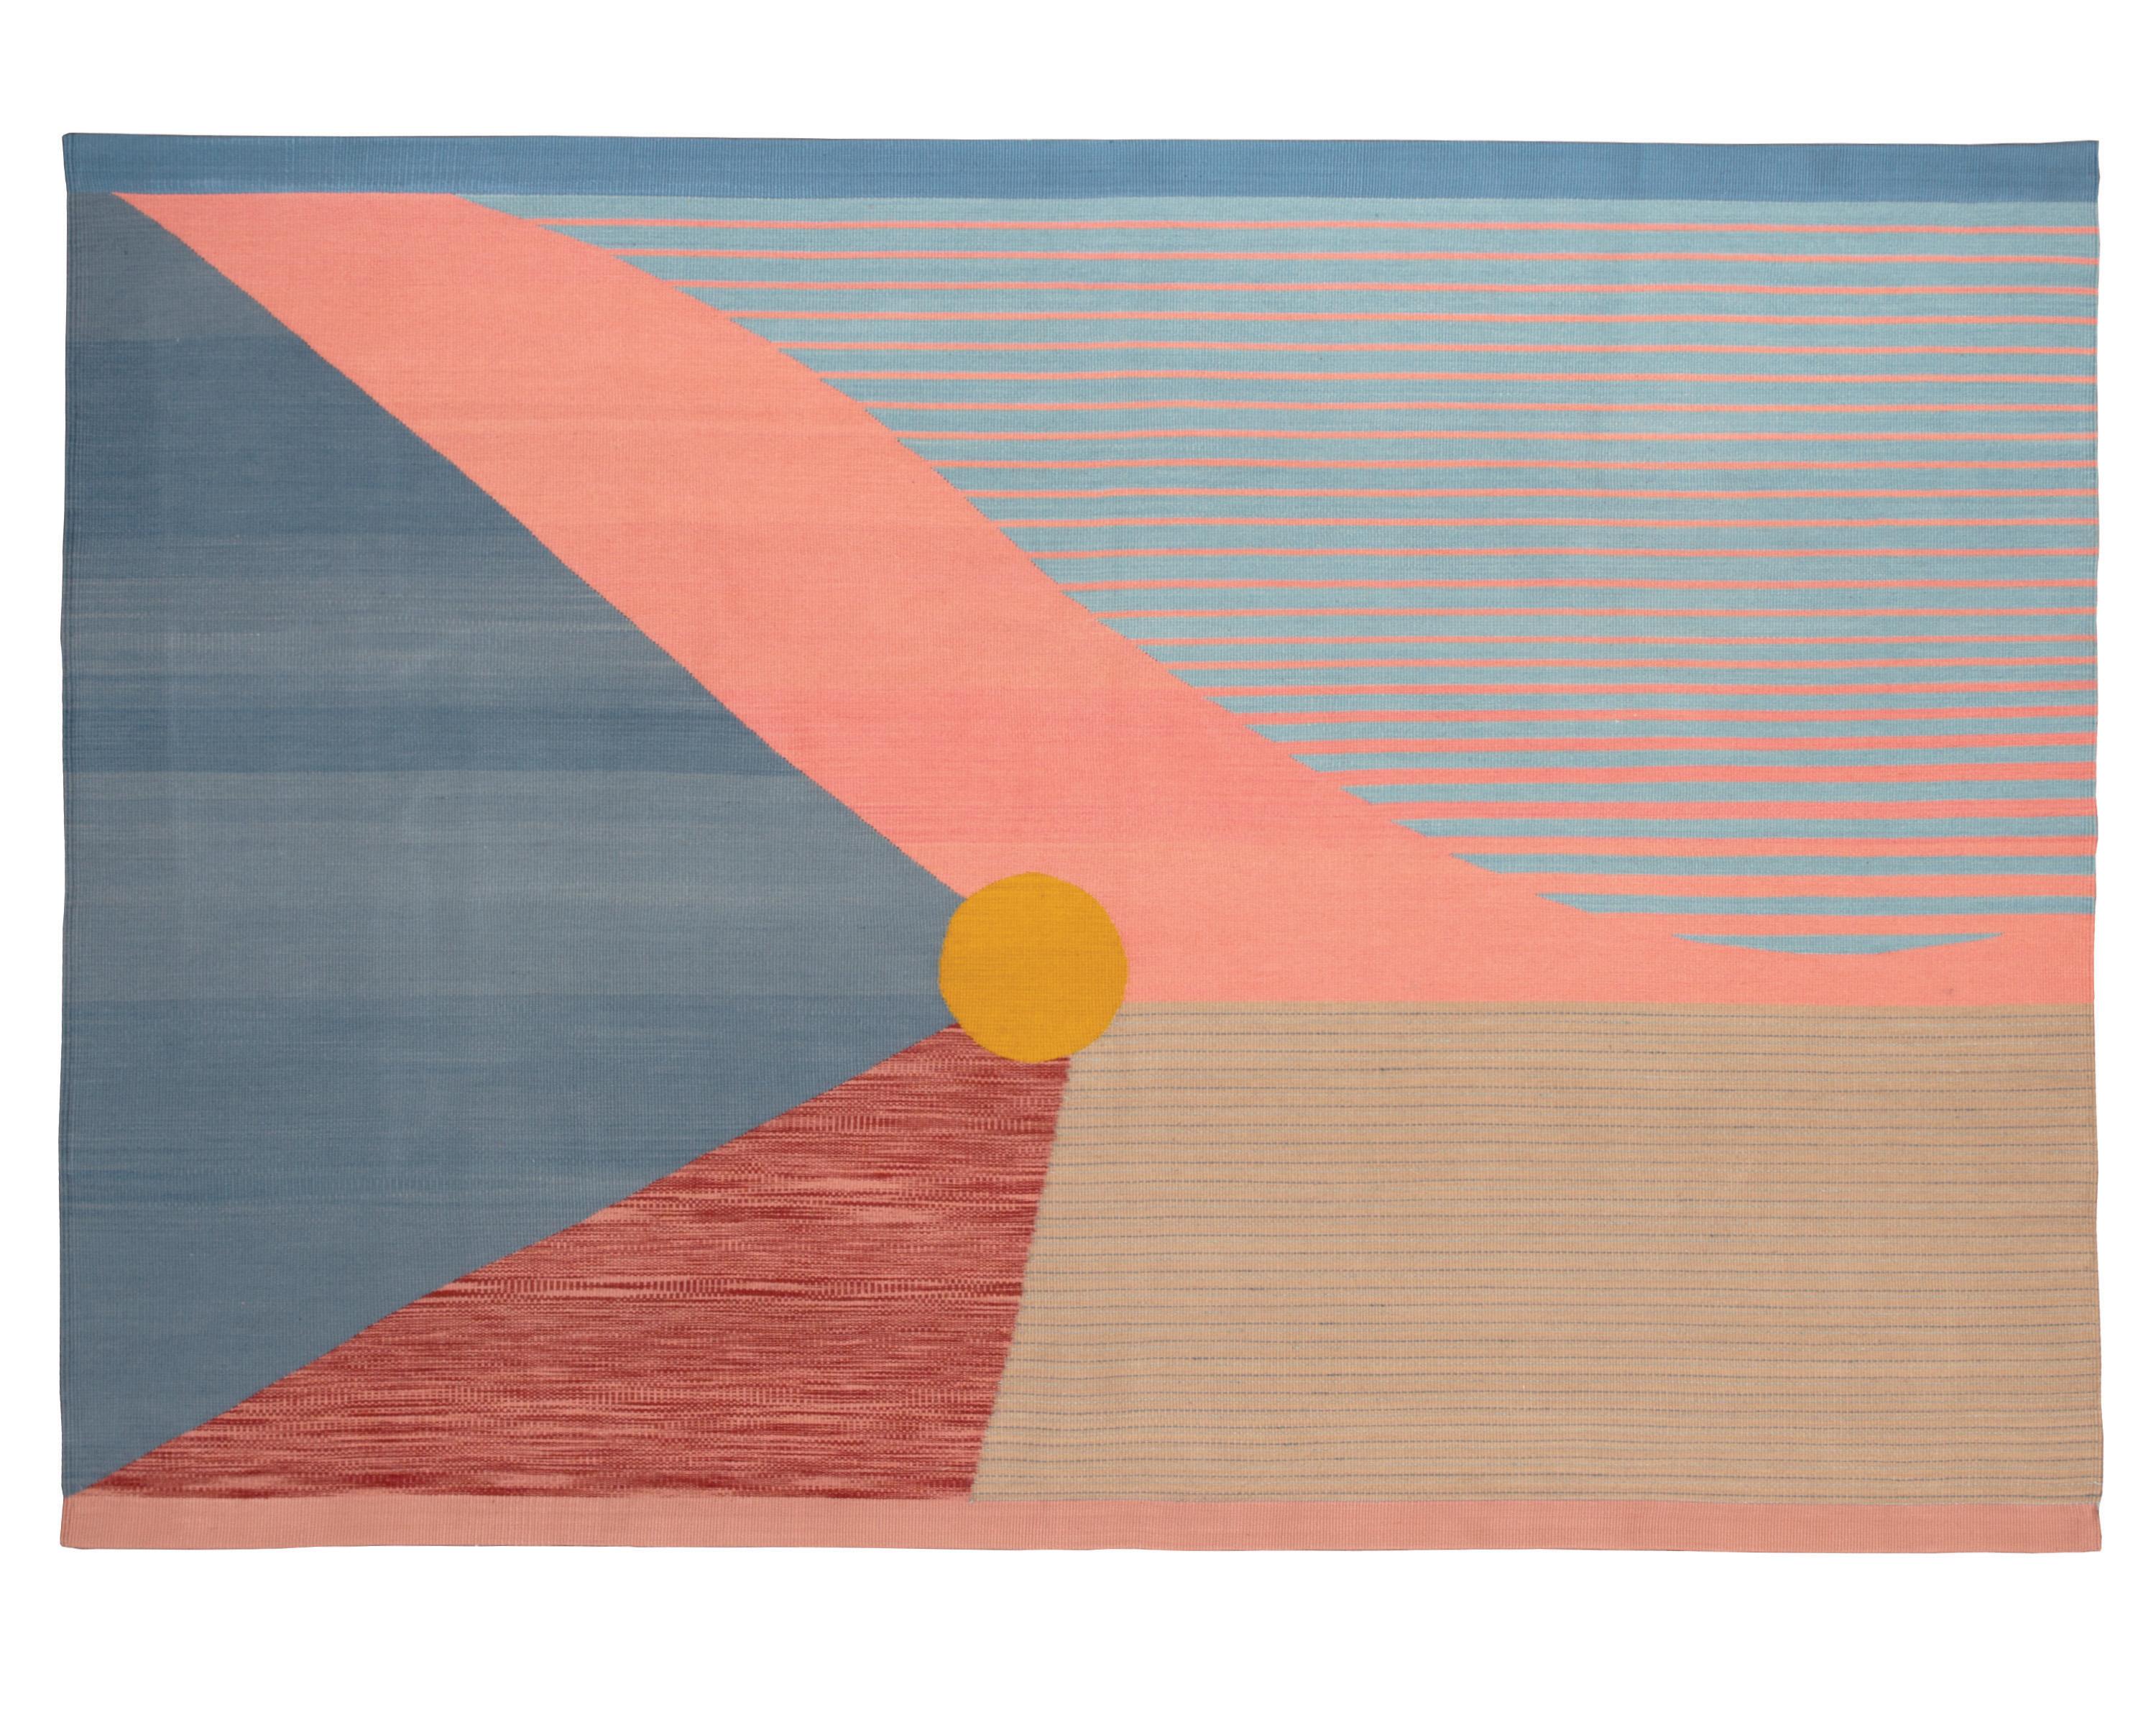 Norte 61 N04 rug by Bi Yuu
Dimensions: D200 x 300 H cm
Material: 70% Lincoln Wool / 30% Wool-Cotton
Density: 2800 yam passes per m2.
Also Available in different dimensions. Dye: Natural.

She founded Bi Yuu with the vision that the work would